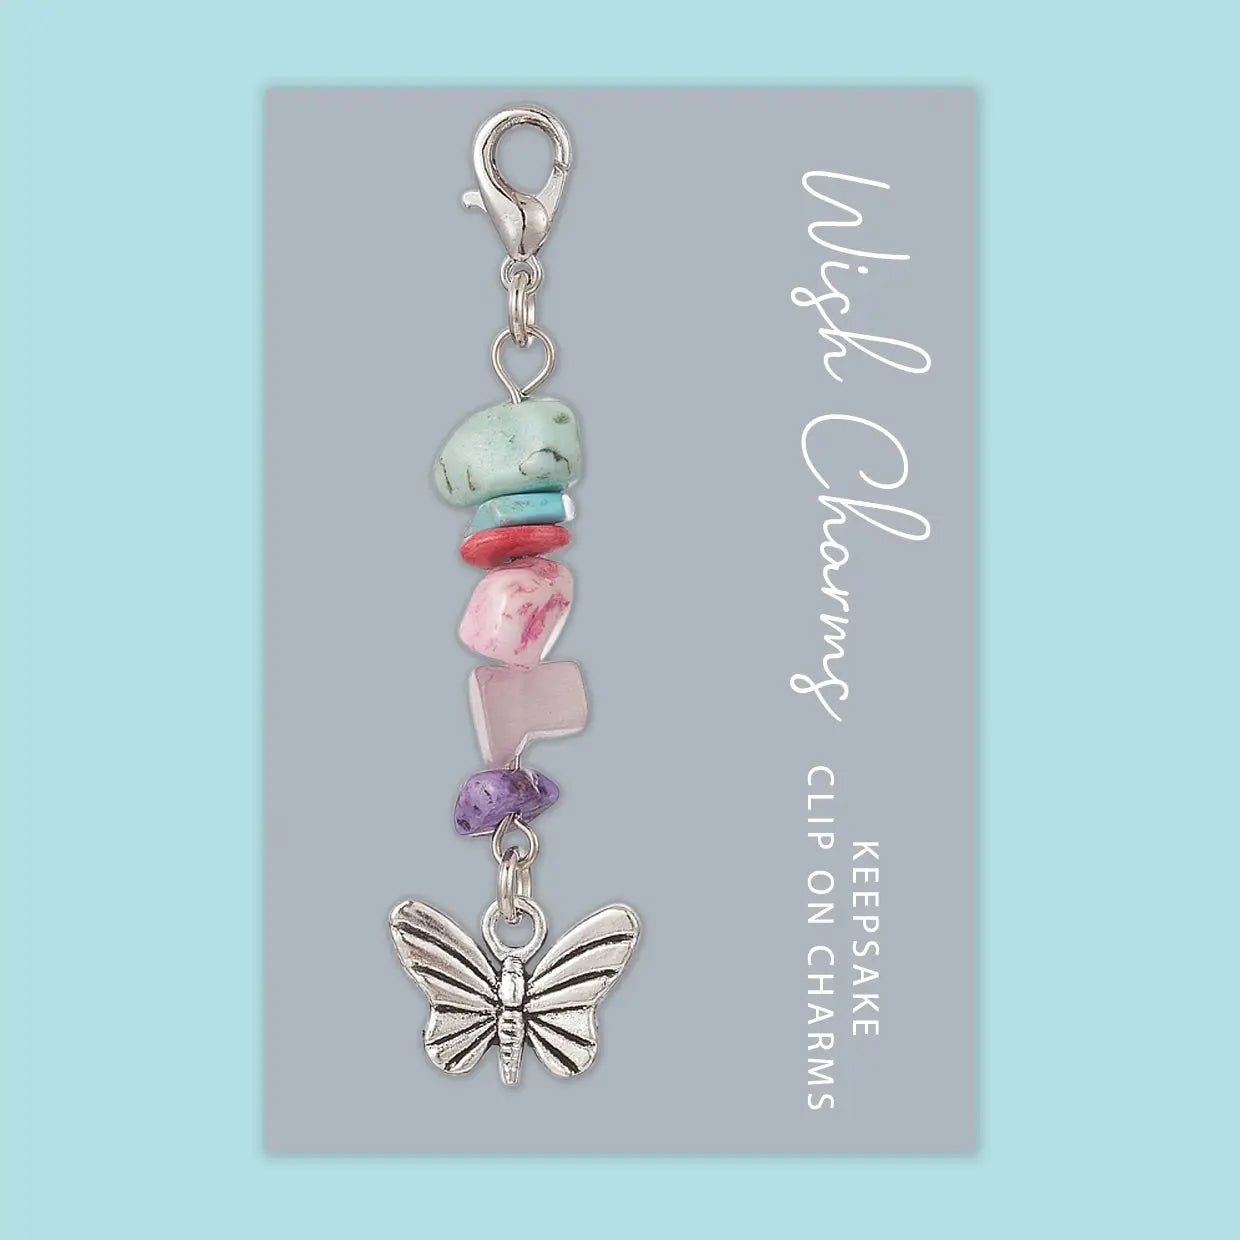 Butterfly - Wish Charms - Keepsake Clip On Charm with Gemstones - WCC015 - The Hare and the Moon